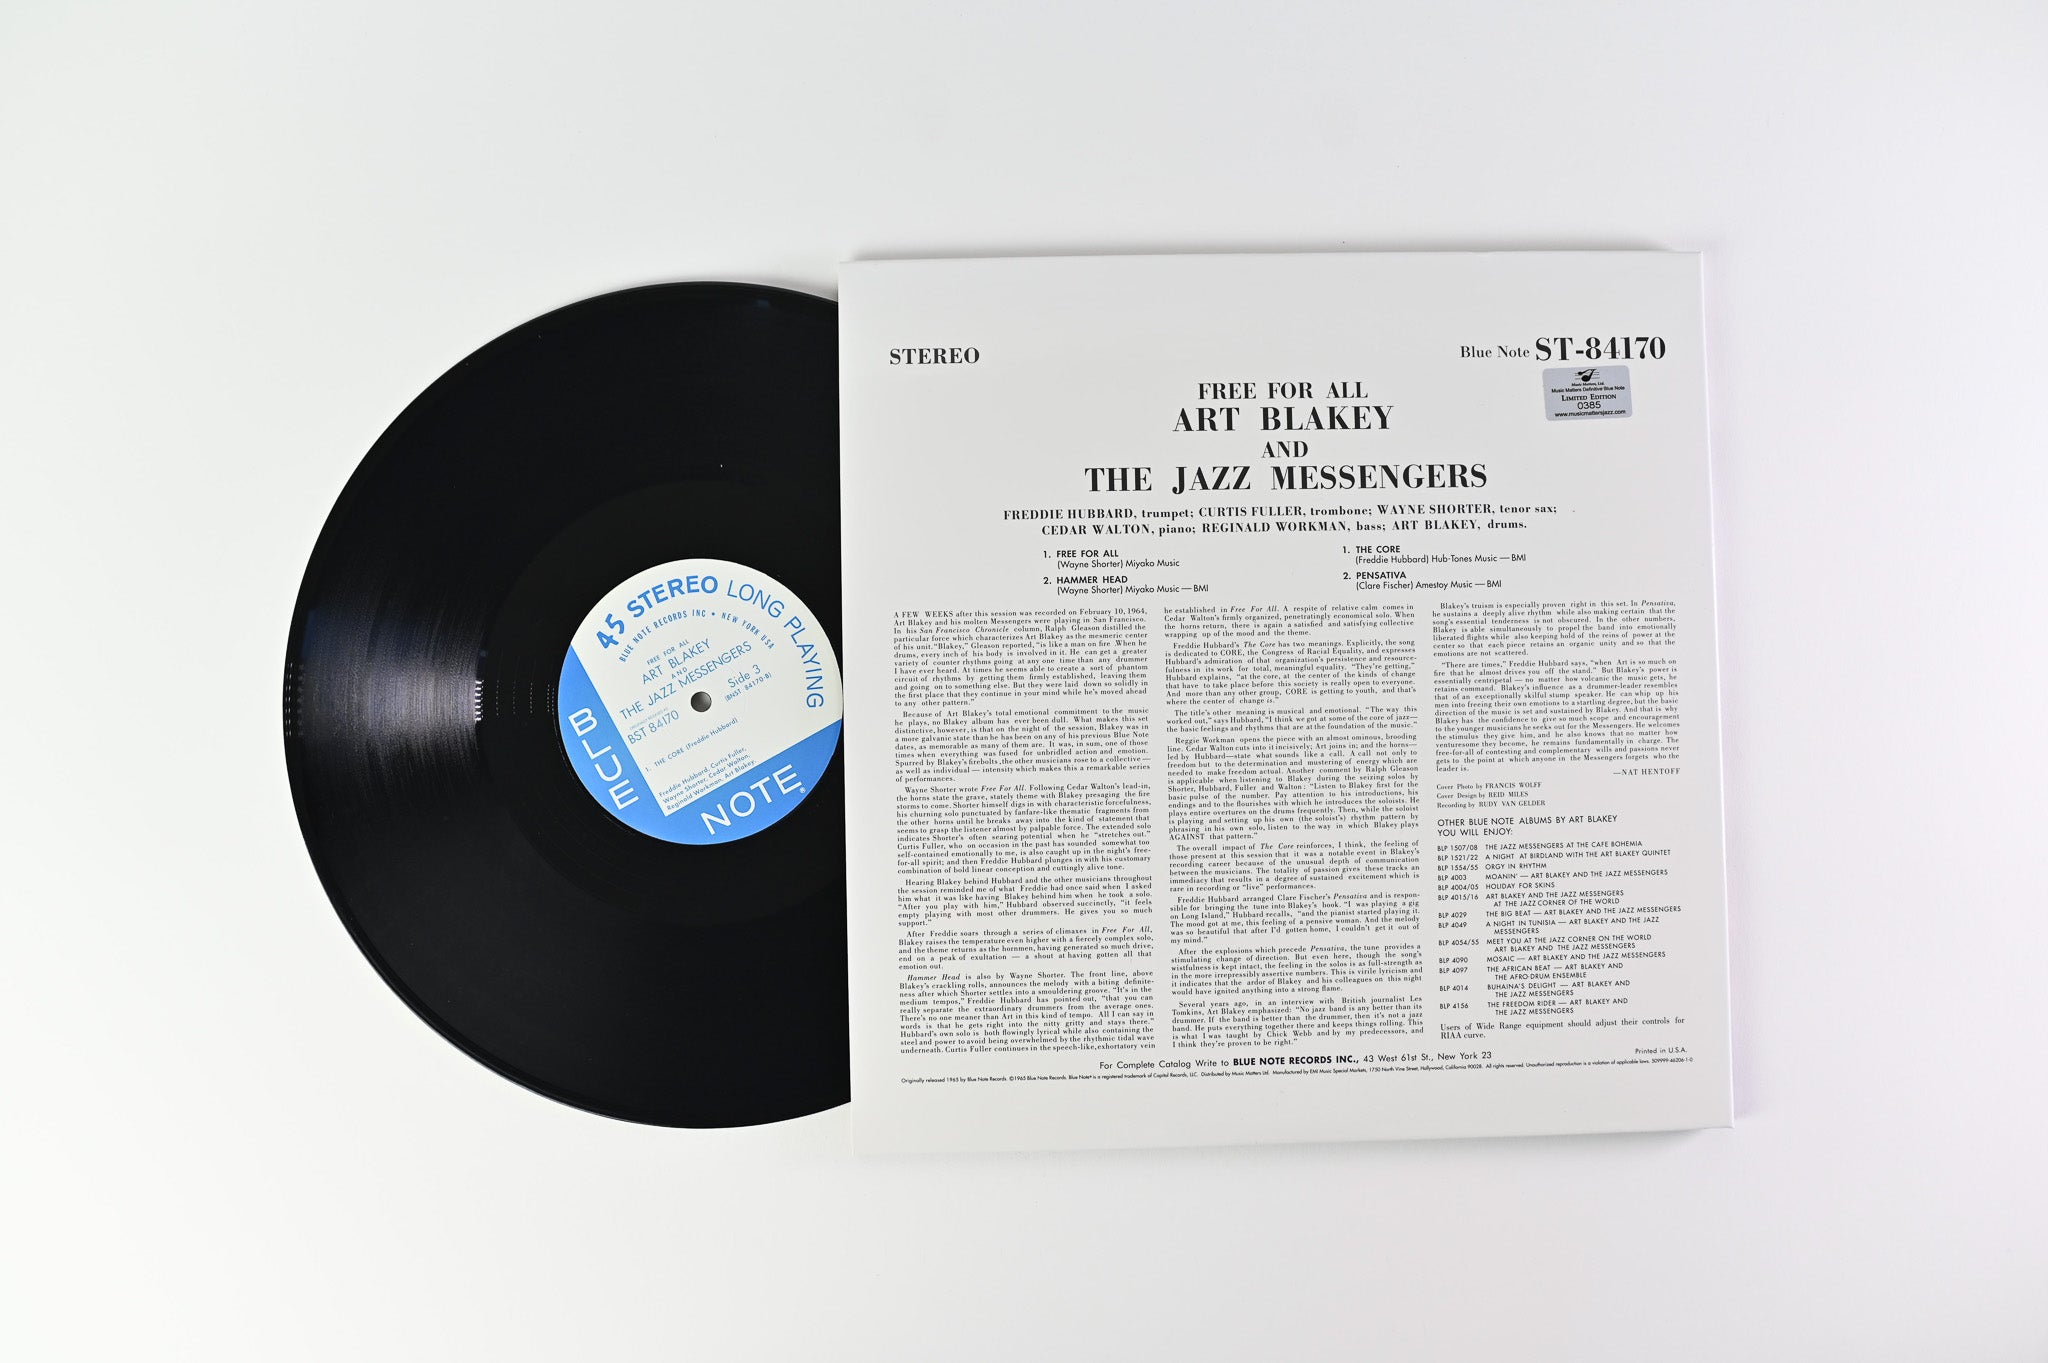 Art Blakey & The Jazz Messengers - Free For All on Blue Note Music Matters Numbered Ltd 45 RPM Reissue